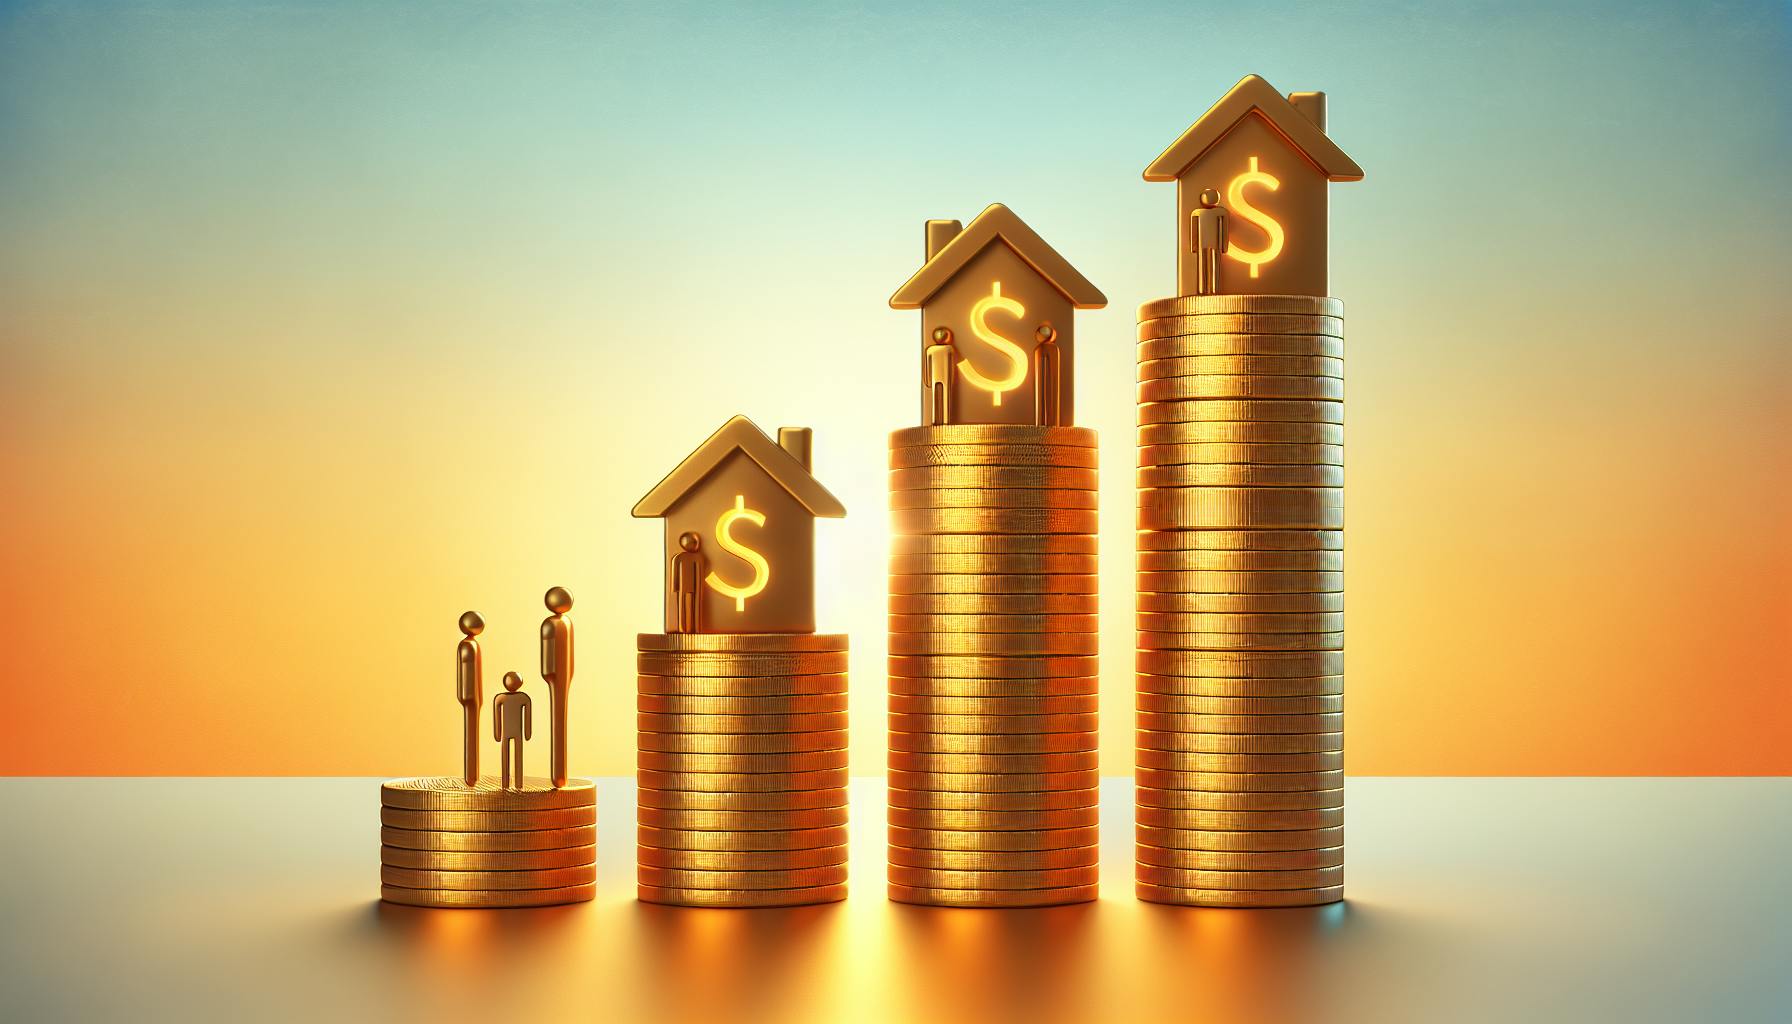 Real Estate Financial Analyst Salary: What's the Market Pay?